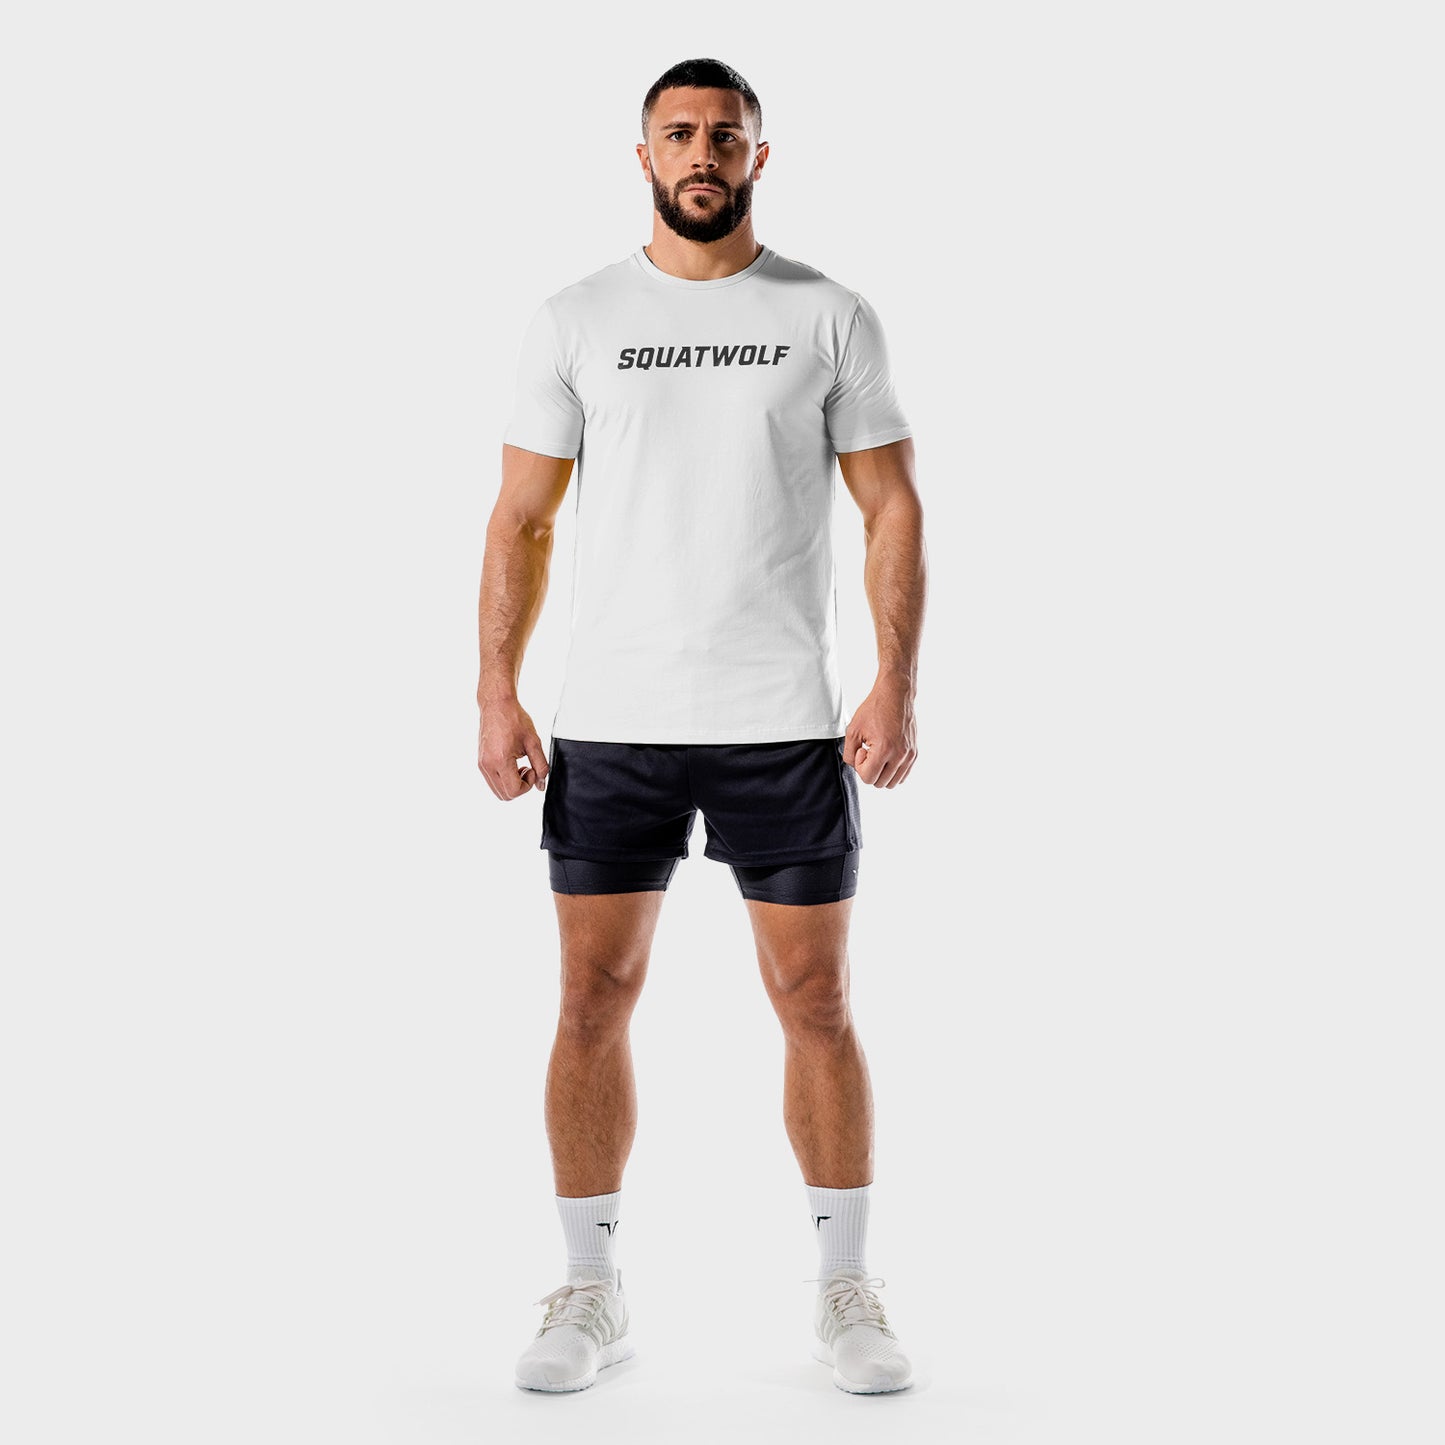 squatwolf-gym-wear-iconic-muscle-tee-white-workout-shirts-for-men